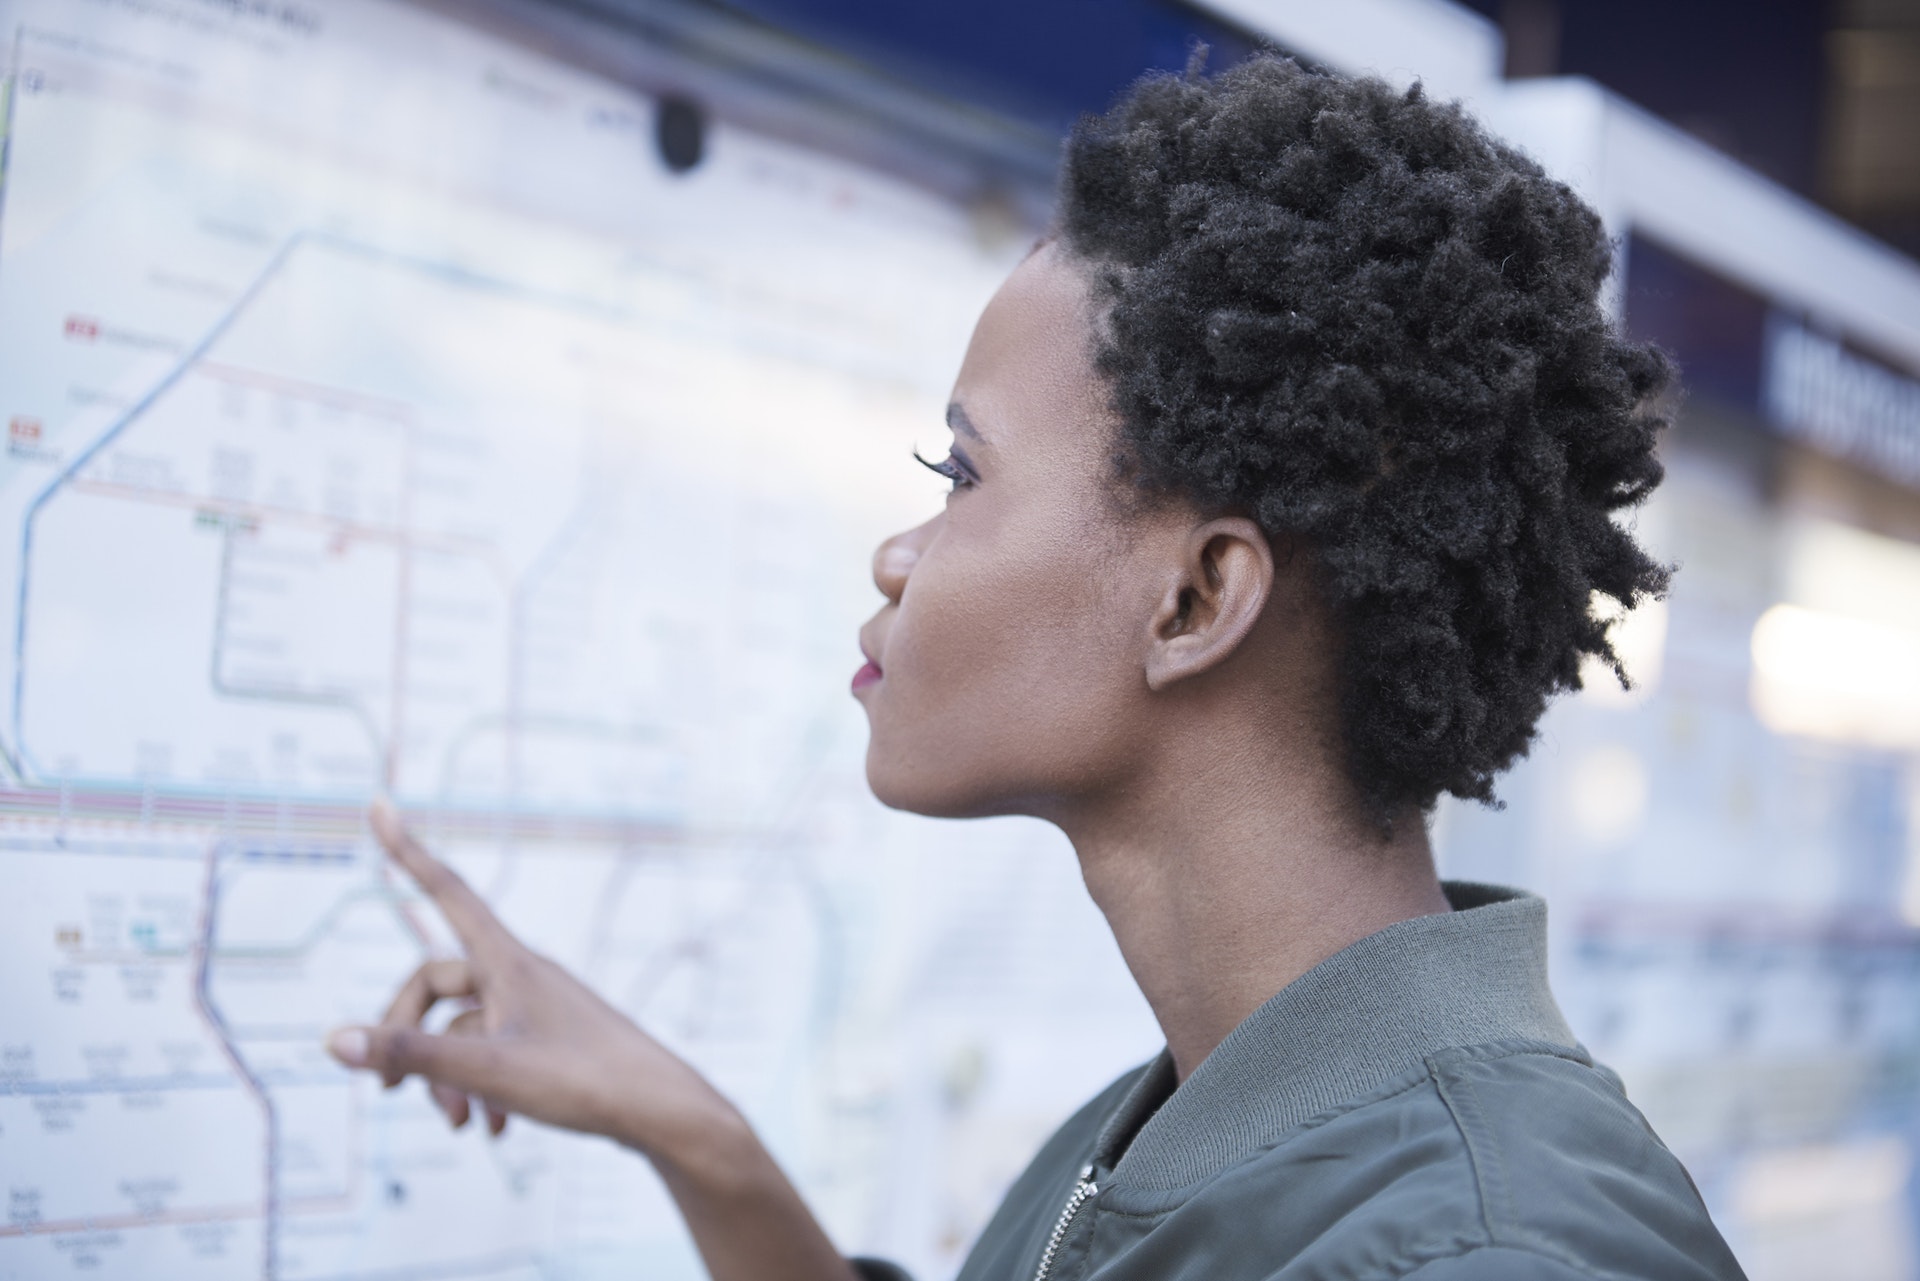 A young woman is looking at a public transport map on the wall of a station in Munich